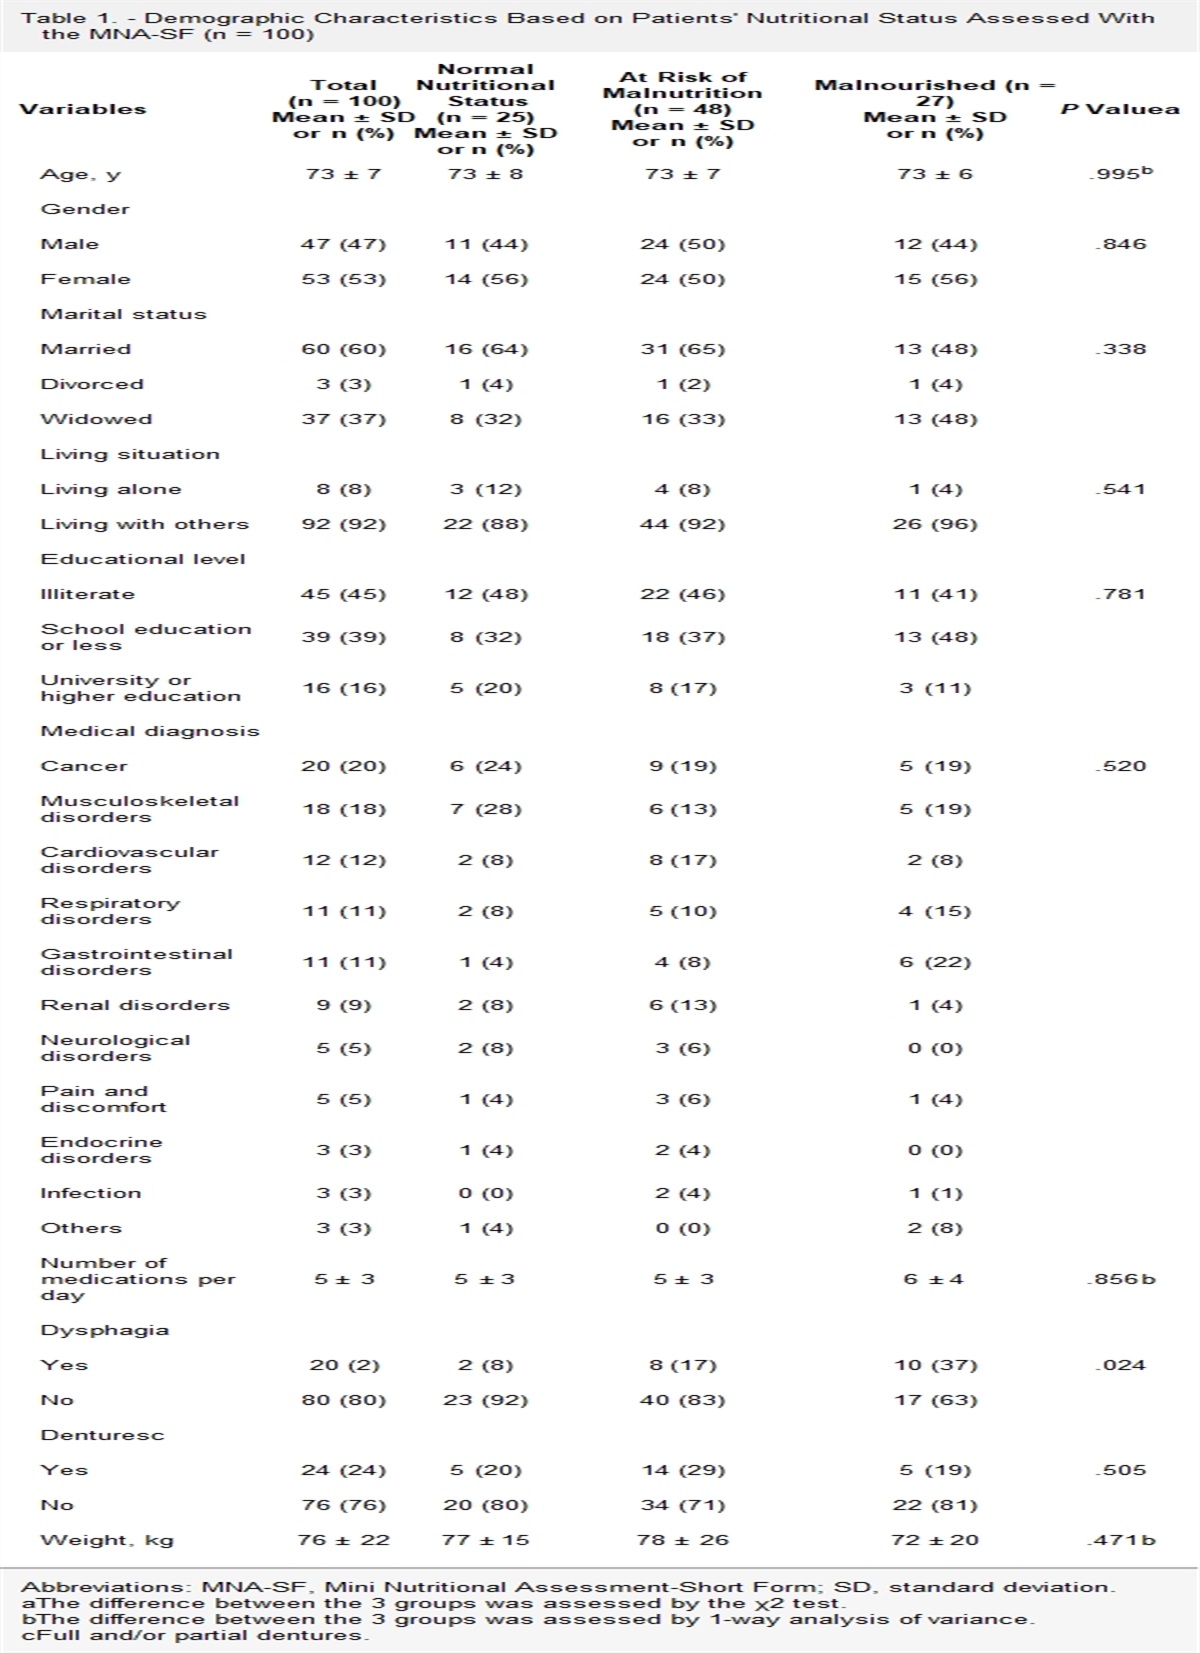 Prevalence and Recognition of Malnutrition in Elderly Patients Admitted to a University Hospital in Jeddah, Saudi Arabia